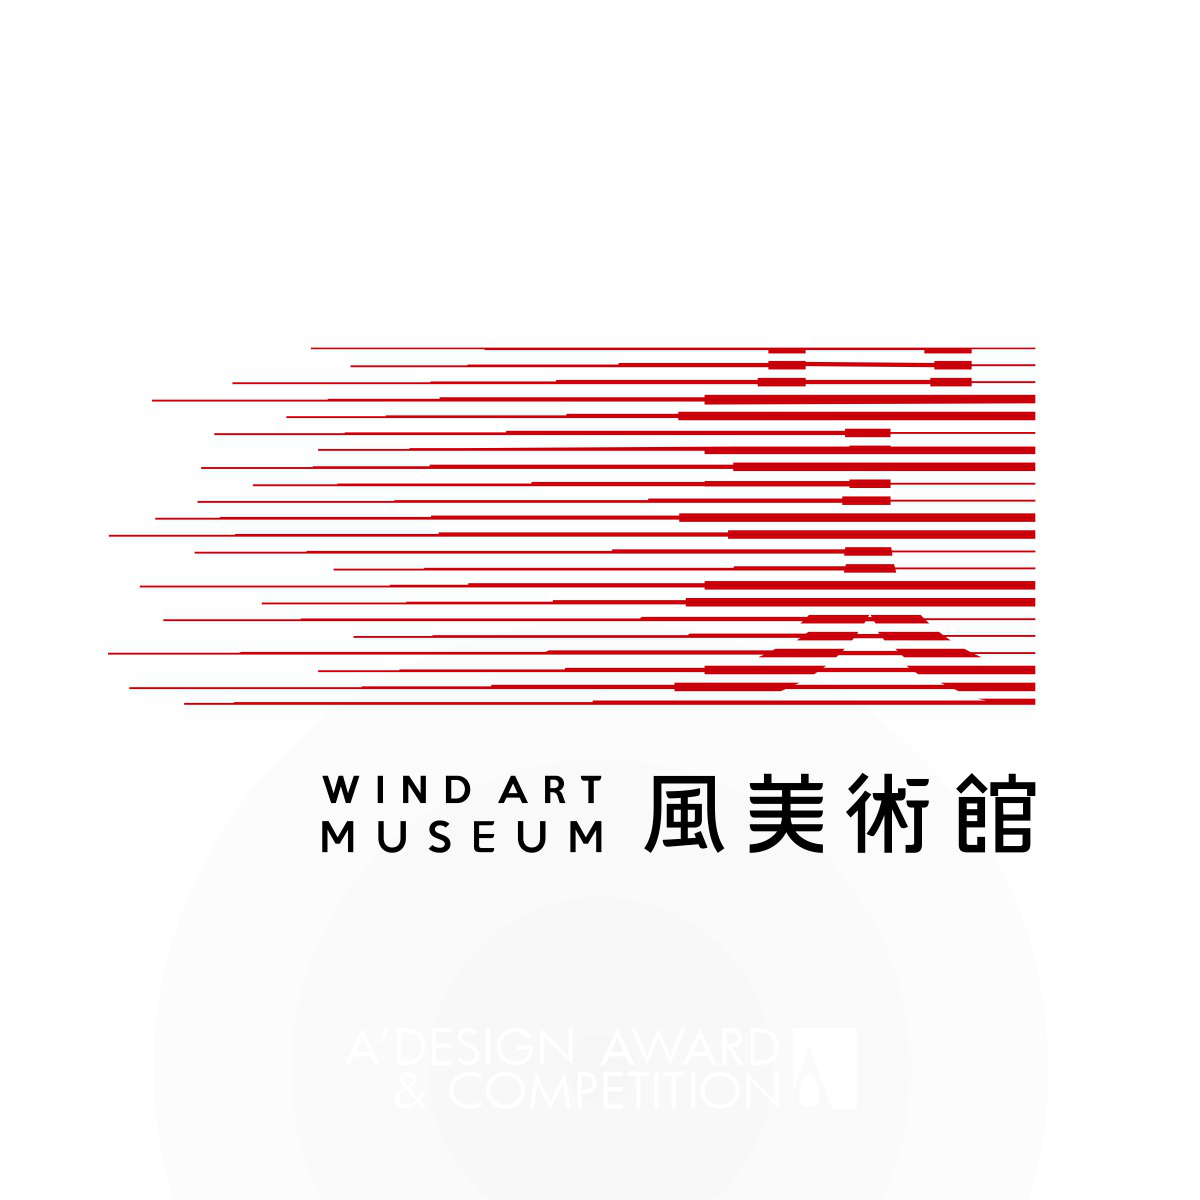 Wind Art Museum Logo by Yong Huang Silver Graphics, Illustration and Visual Communication Design Award Winner 2022 